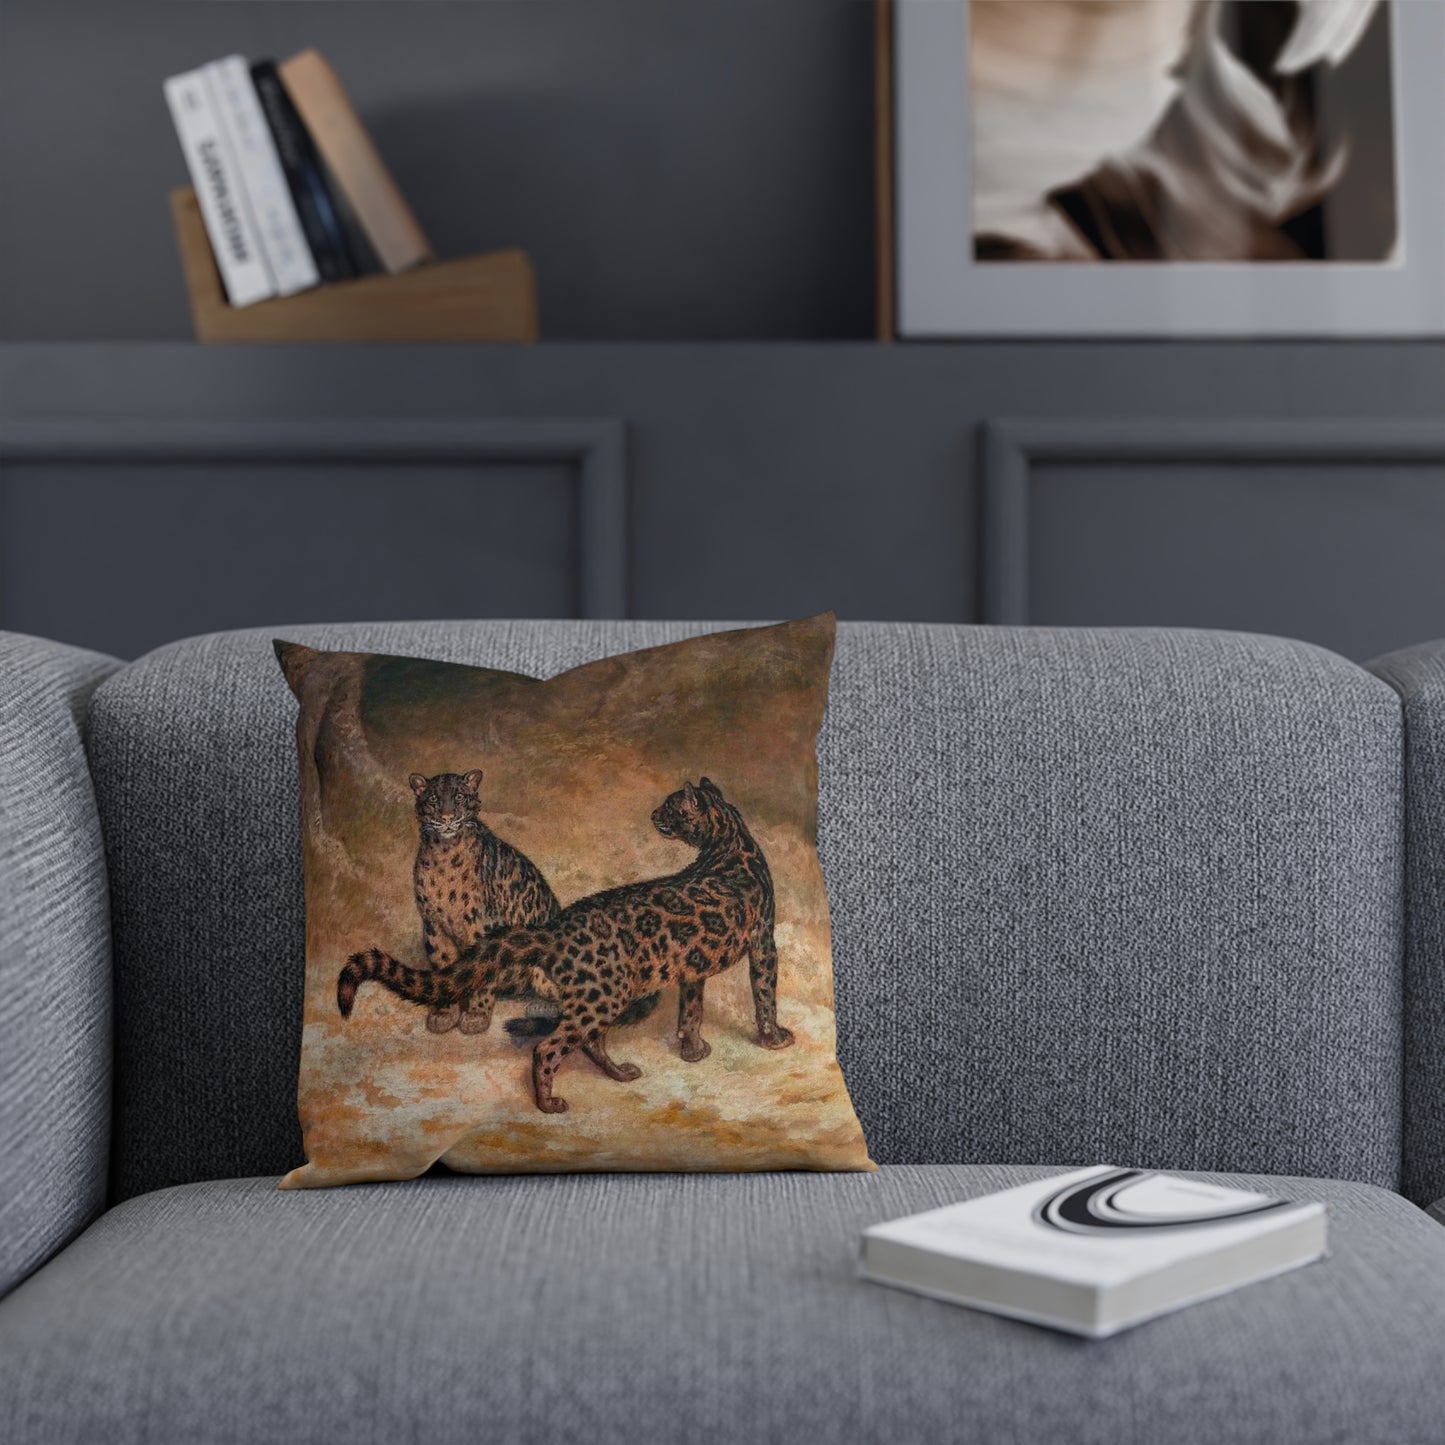 Clouded Leopards Throw Pillow